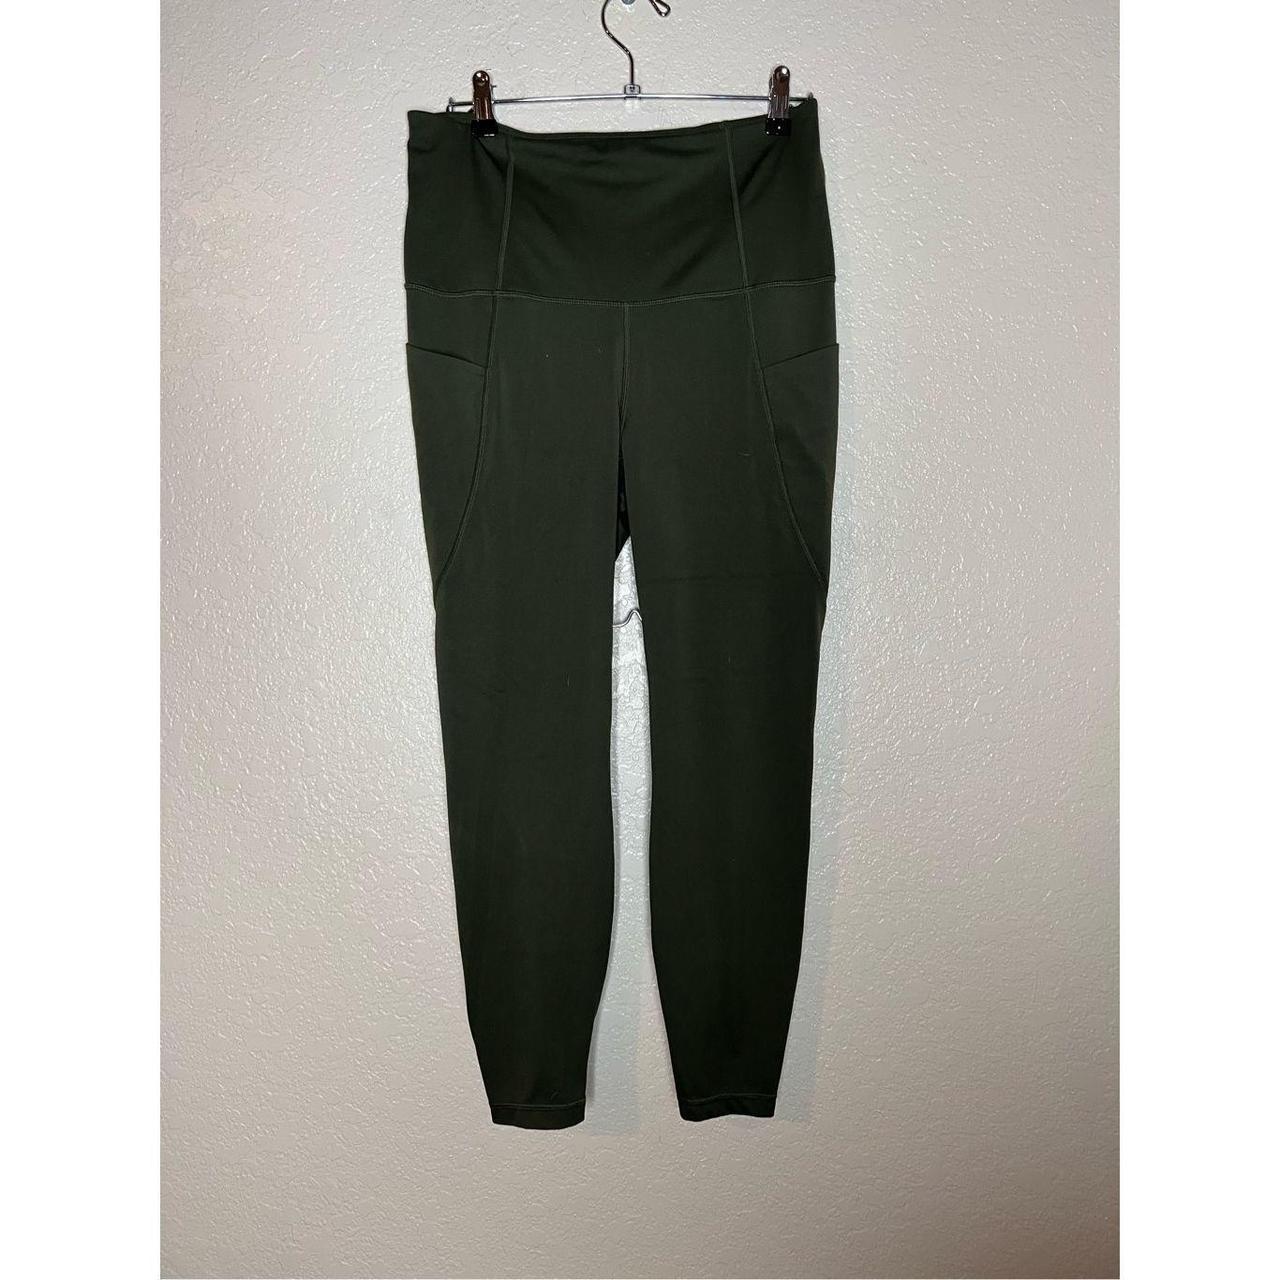 All In Motion activewear leggings with pockets and - Depop